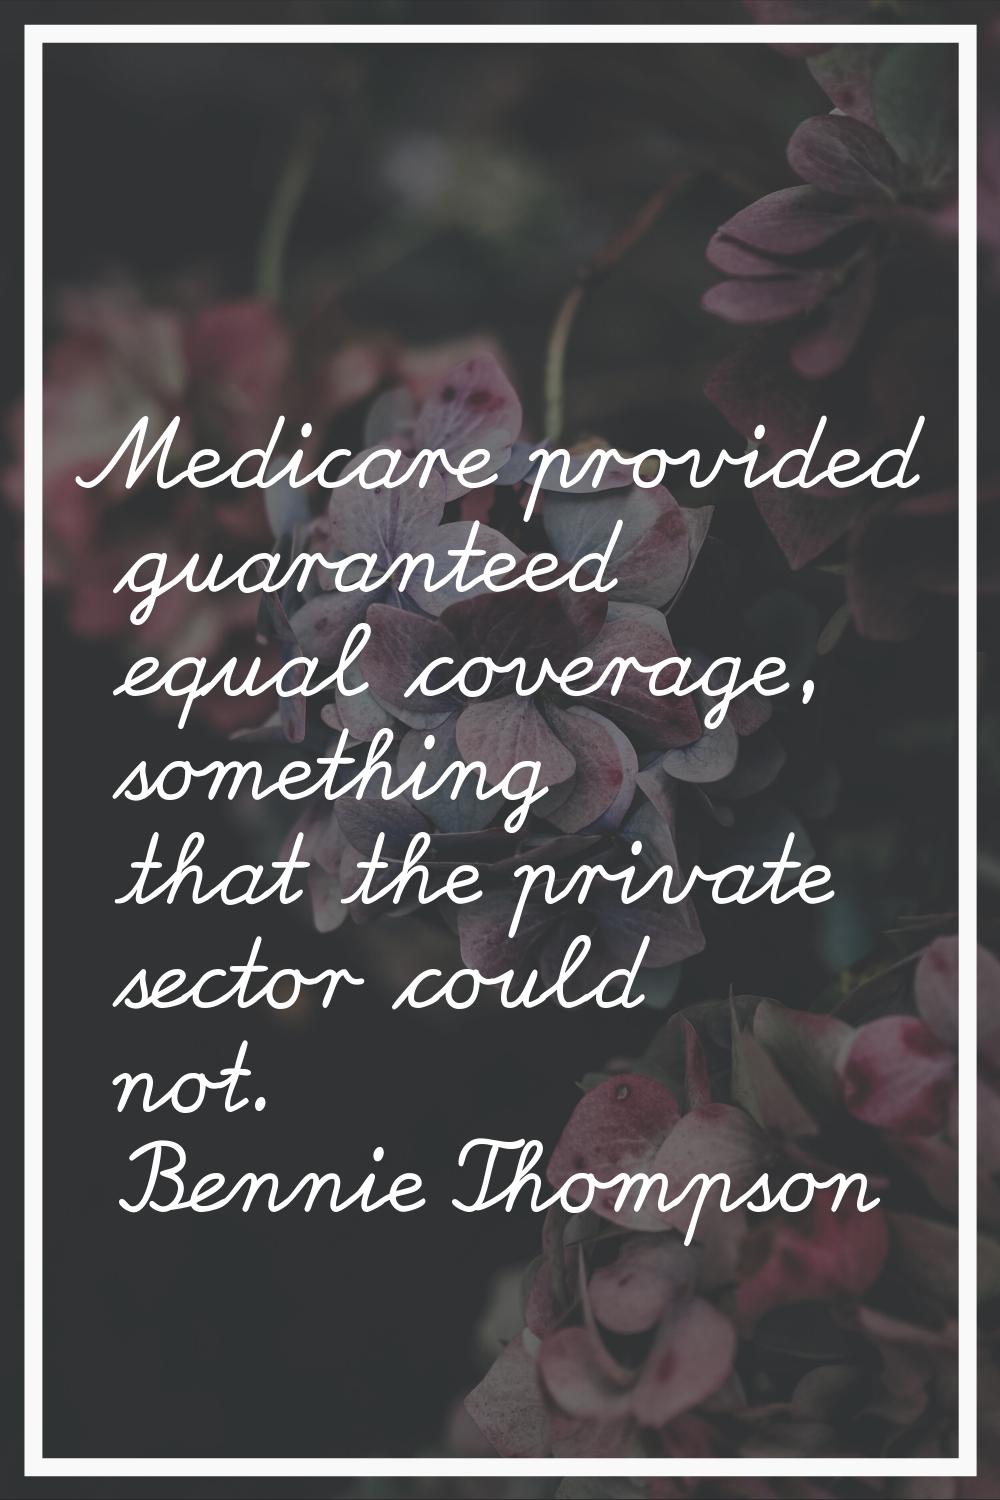 Medicare provided guaranteed equal coverage, something that the private sector could not.